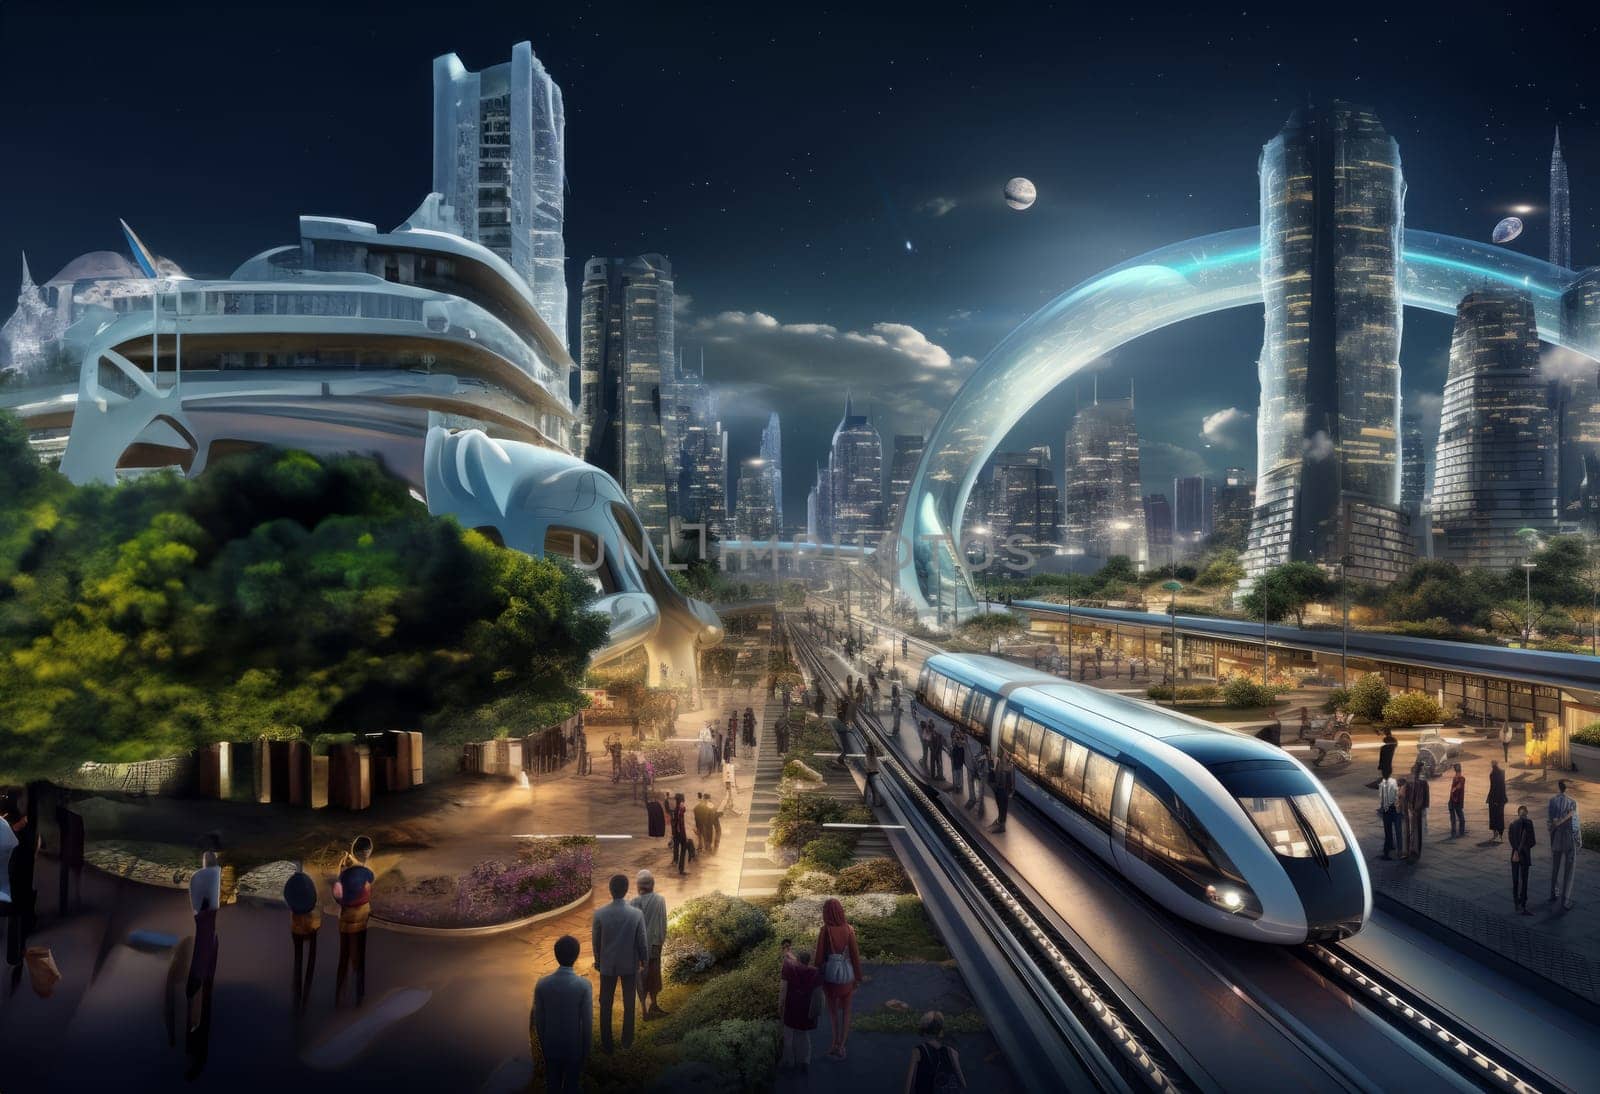 A representation of a futuristic city with modern trains, futuristic streets and cities.Generated image.